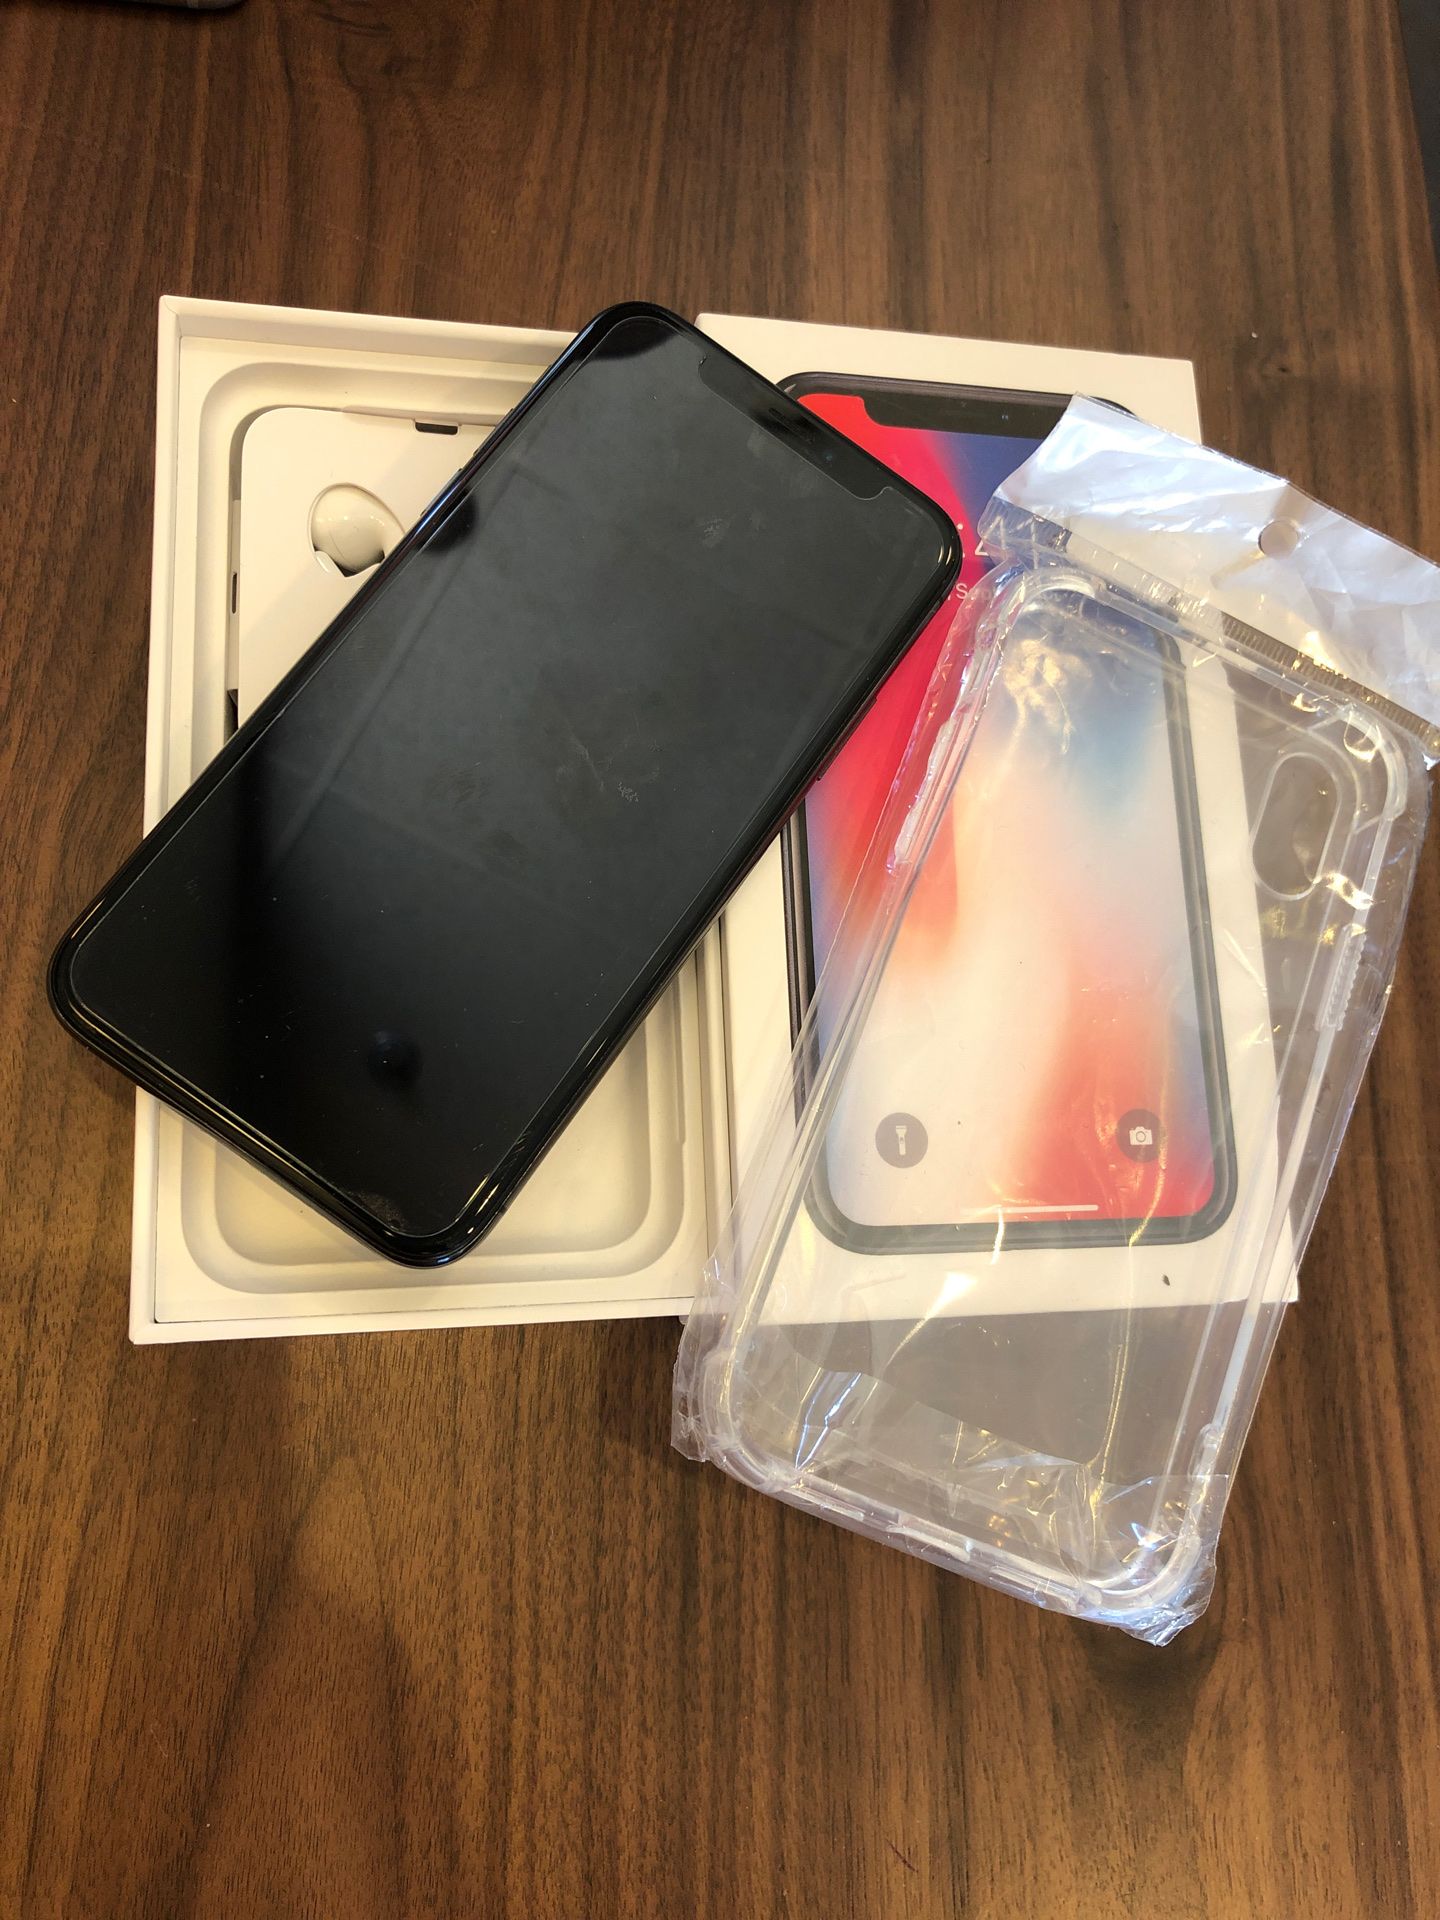 Apple iPhone X unlocked works any carrier I can deliver too